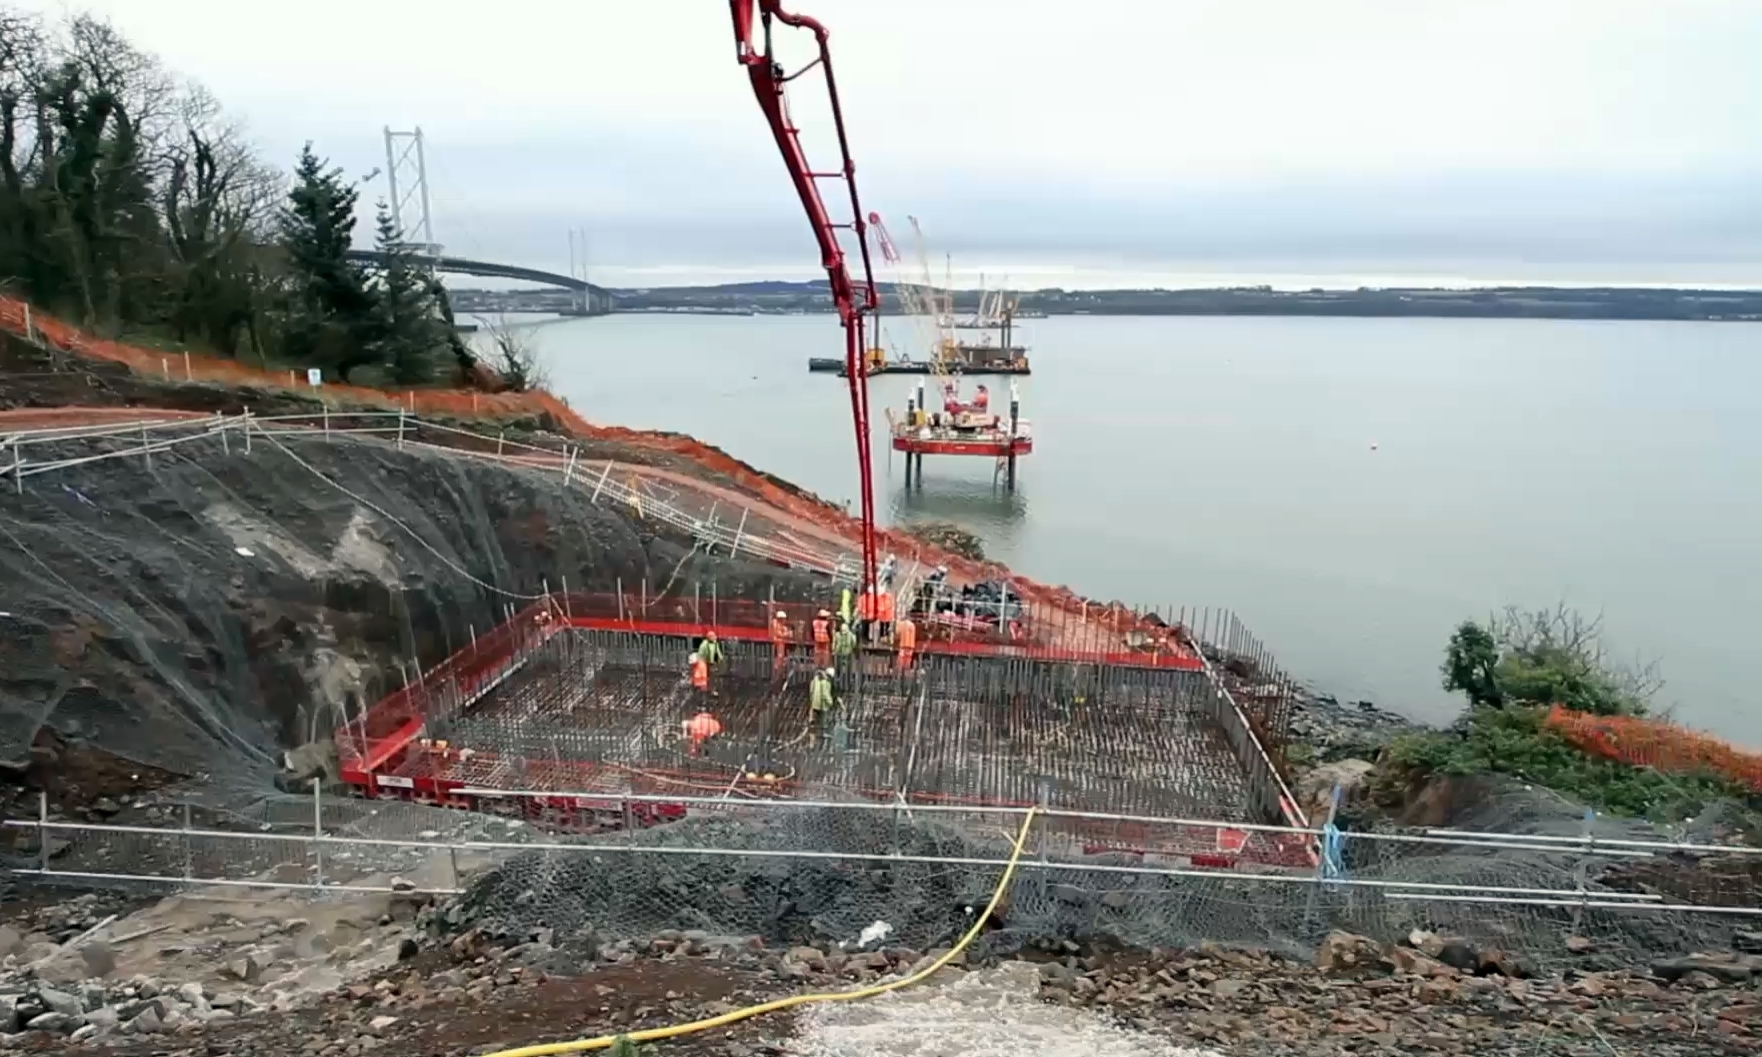 The Queensferry Crossing story is told in amazing depth on the new site.